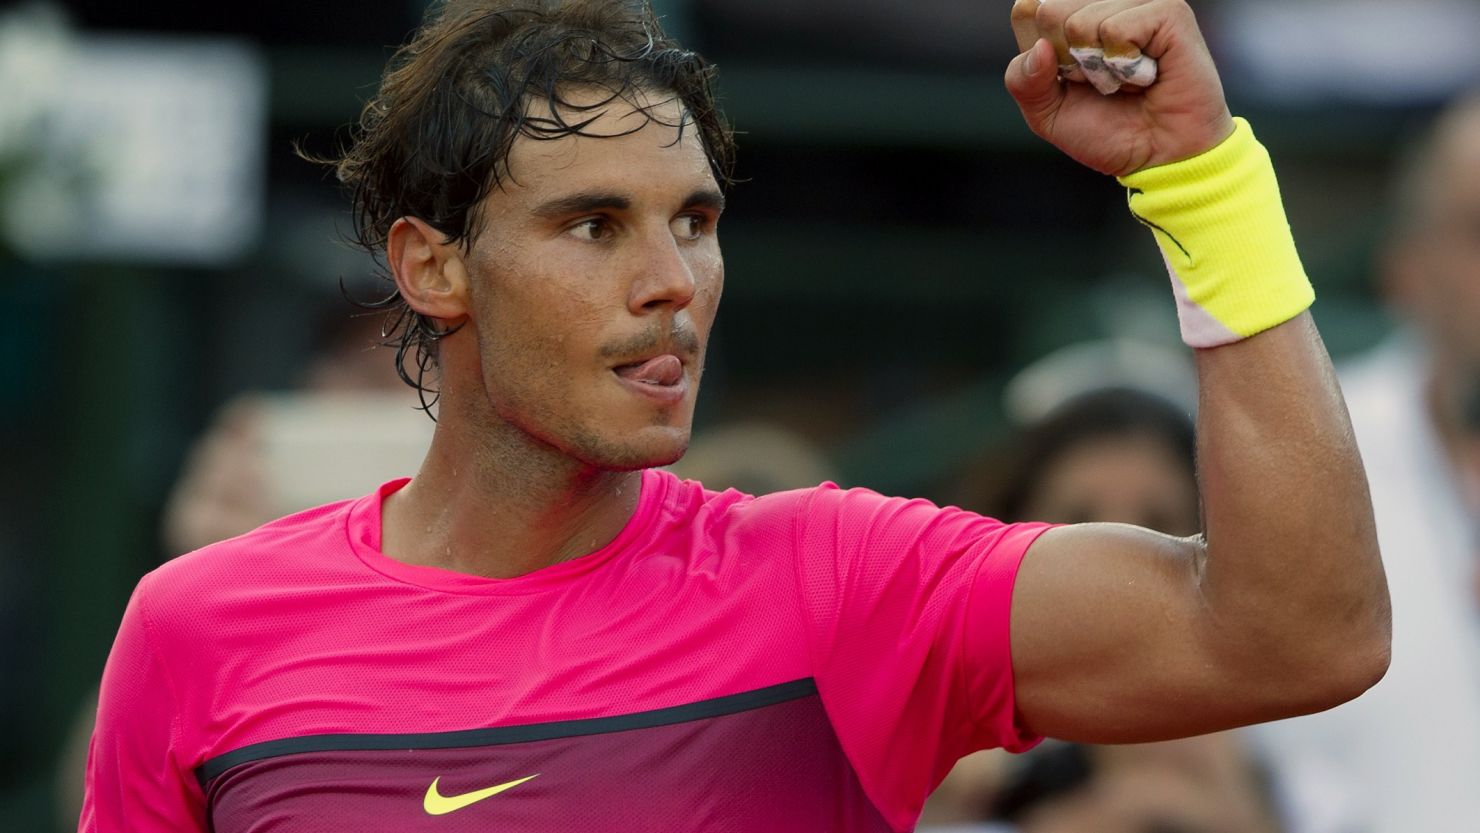 Rafael Nadal earned his 46th ATP Tour title on clay by winning the Argentina Open in Buenos Aires.